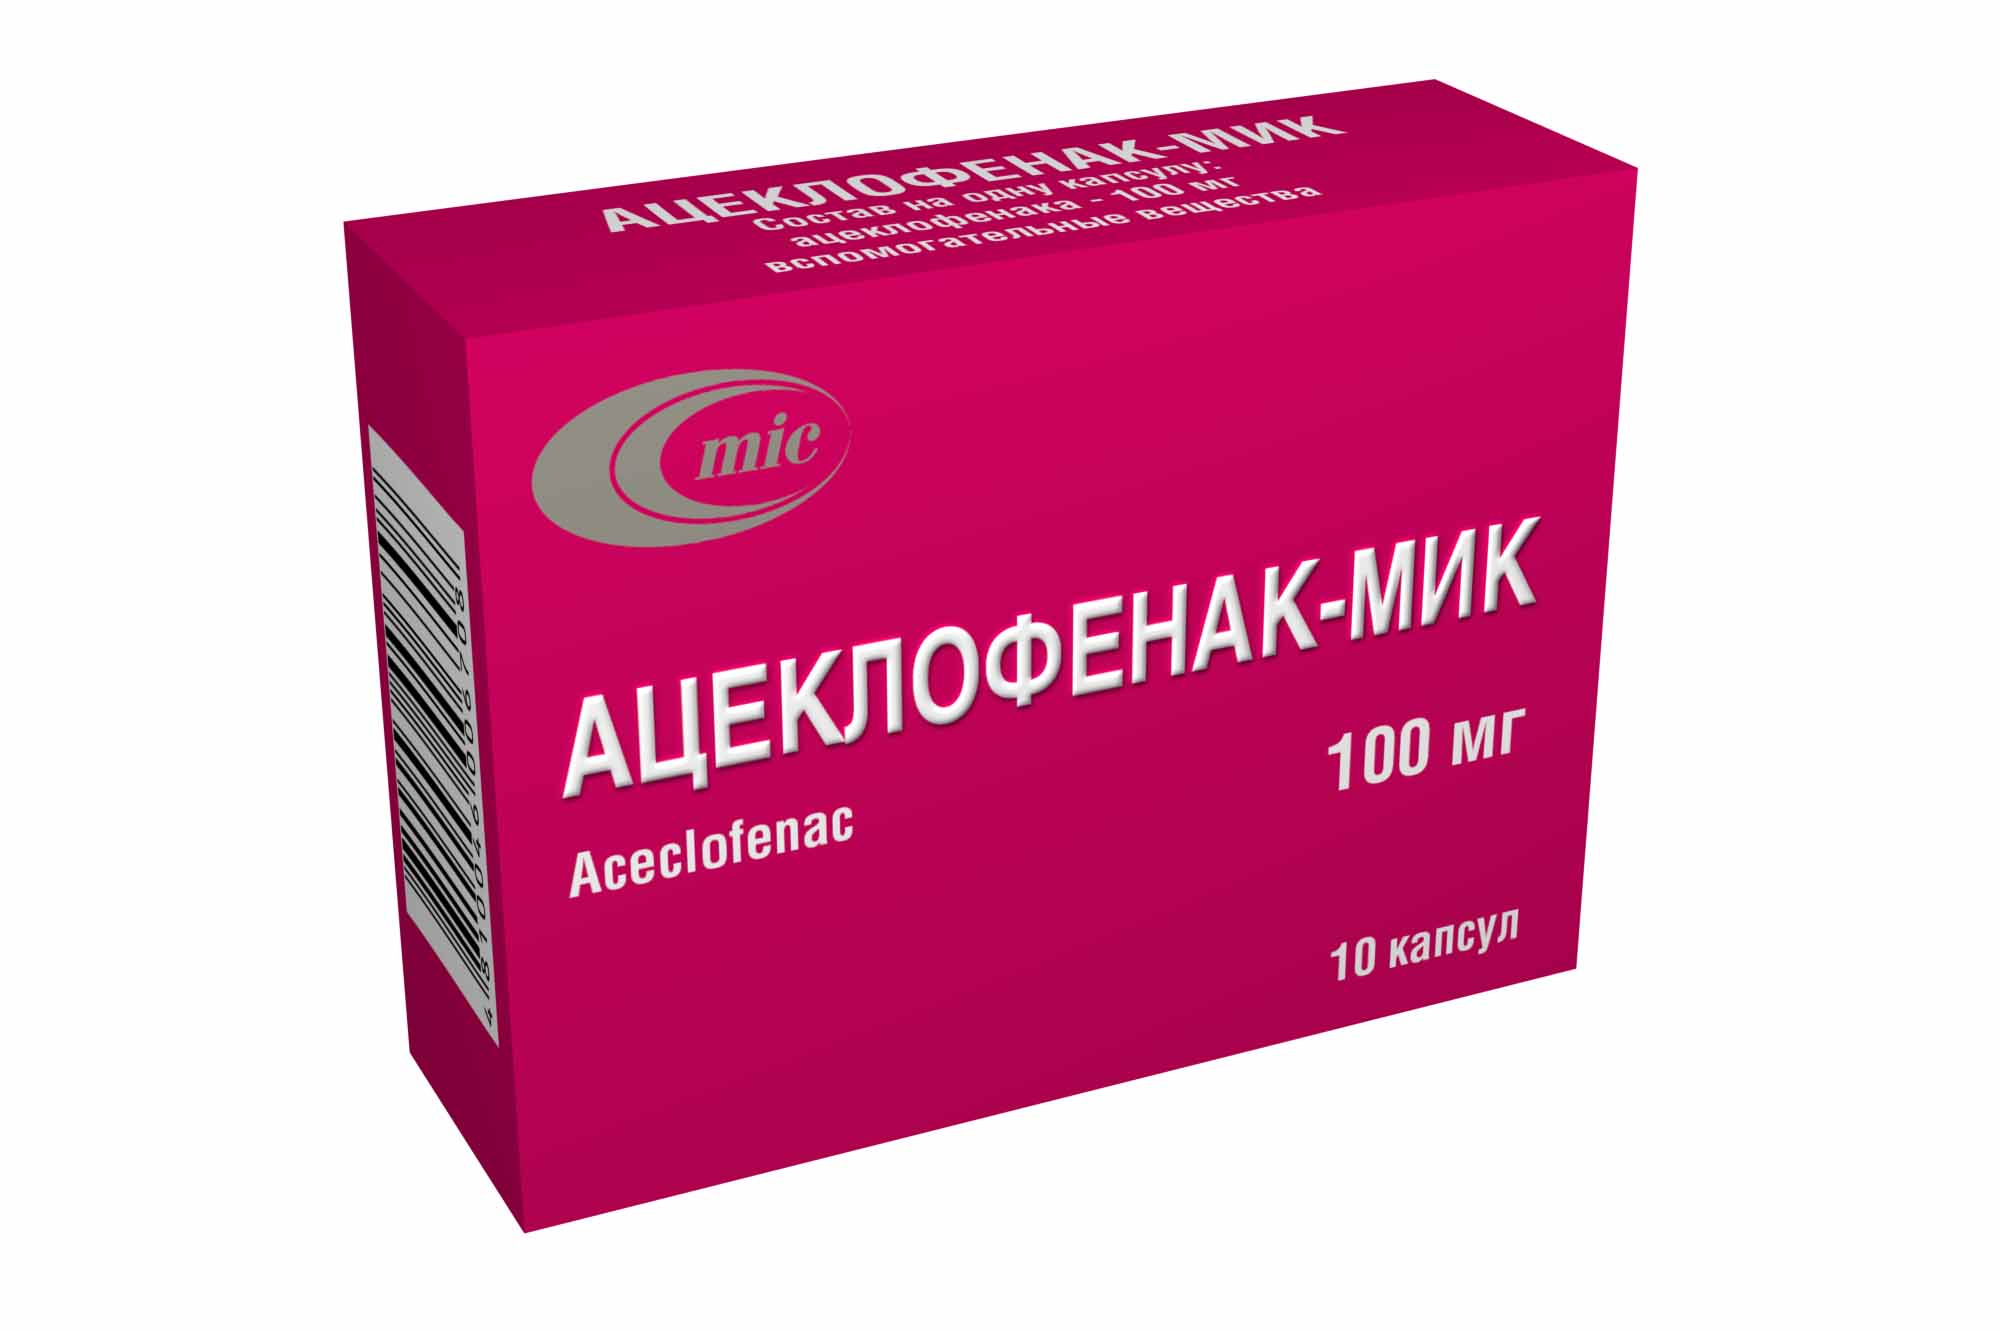 Ministry of Health of The Republic of Belarus registered a new drug ACECLOFENAK-MIC, capsules 100 mg